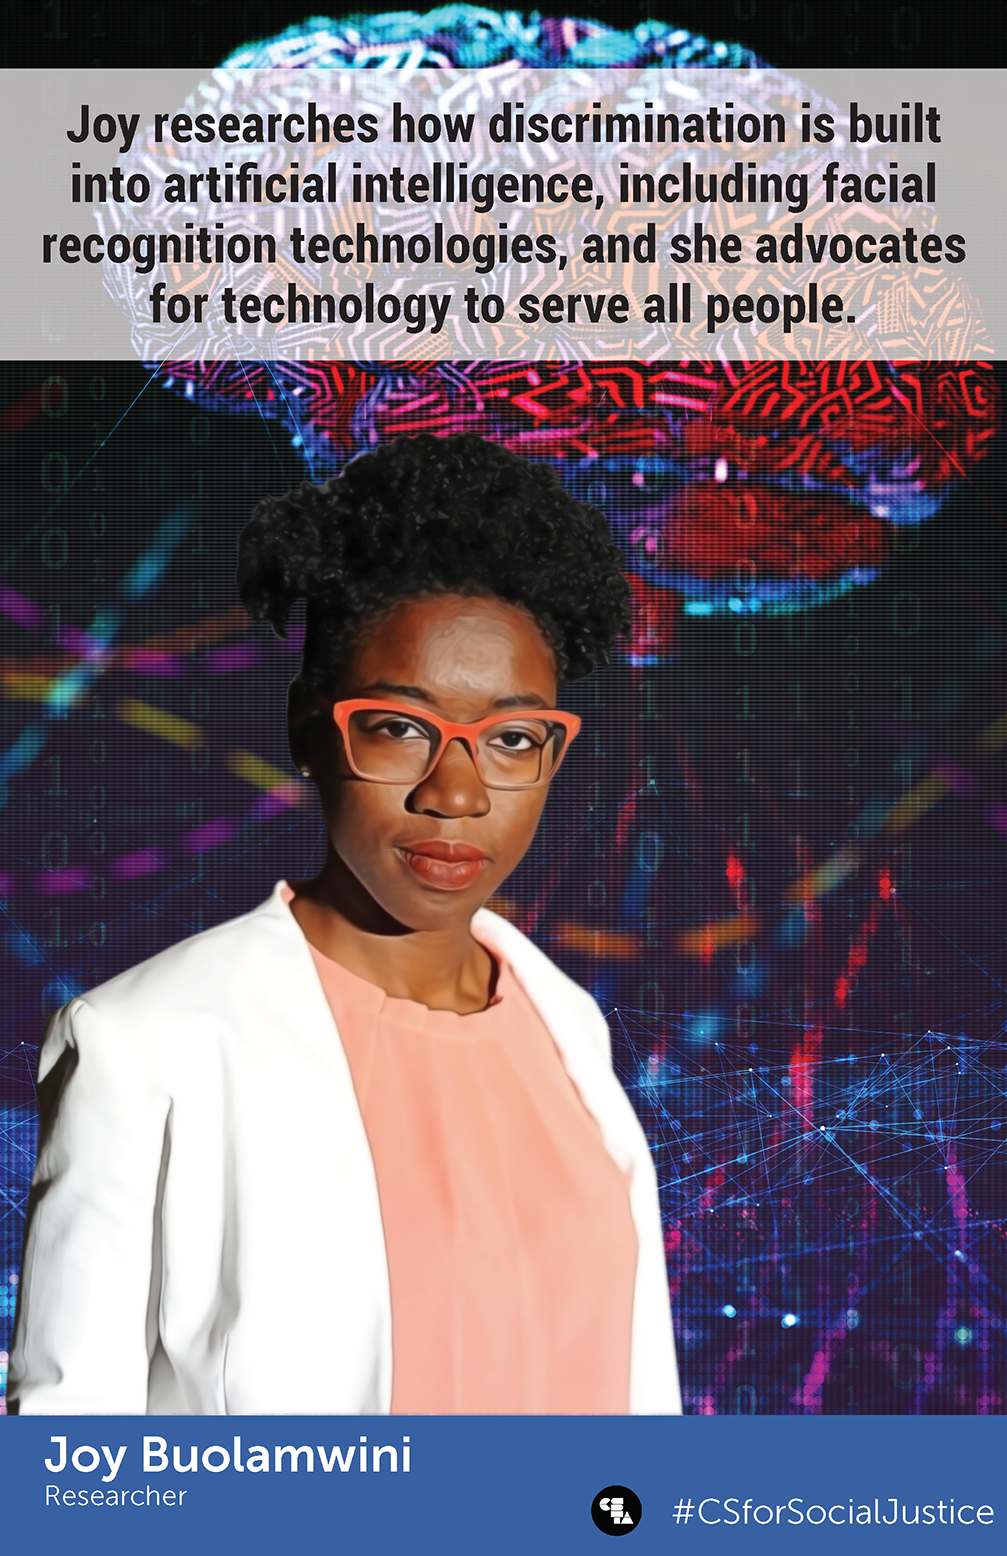 Joy Buolamwini Poster. 

Joy is pictured in front of a model of a brain and strings of code. She is a black woman with bright orange glasses, white blazer and peach blouse. 
"Joy researches how discrimination is built into artificial intelligence, including facial recognition technologies, and she advocates for technology to serve all people."